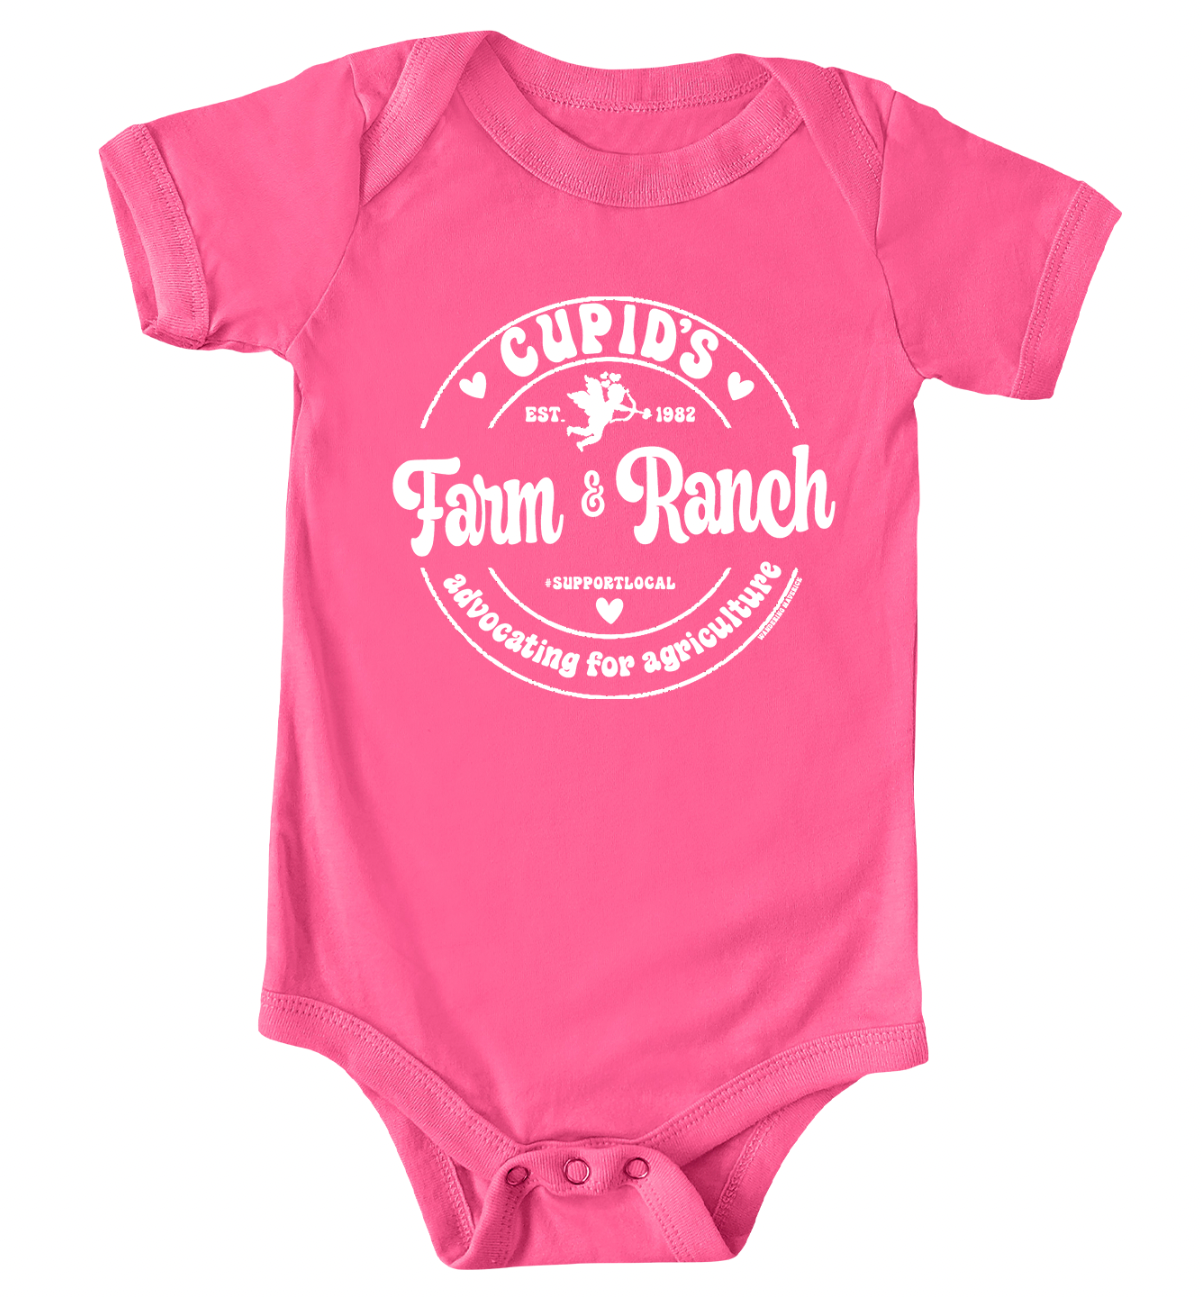 Cupid's Farm & Ranch White Ink One Piece/T-Shirt (Newborn - Youth XL) - Multiple Colors!